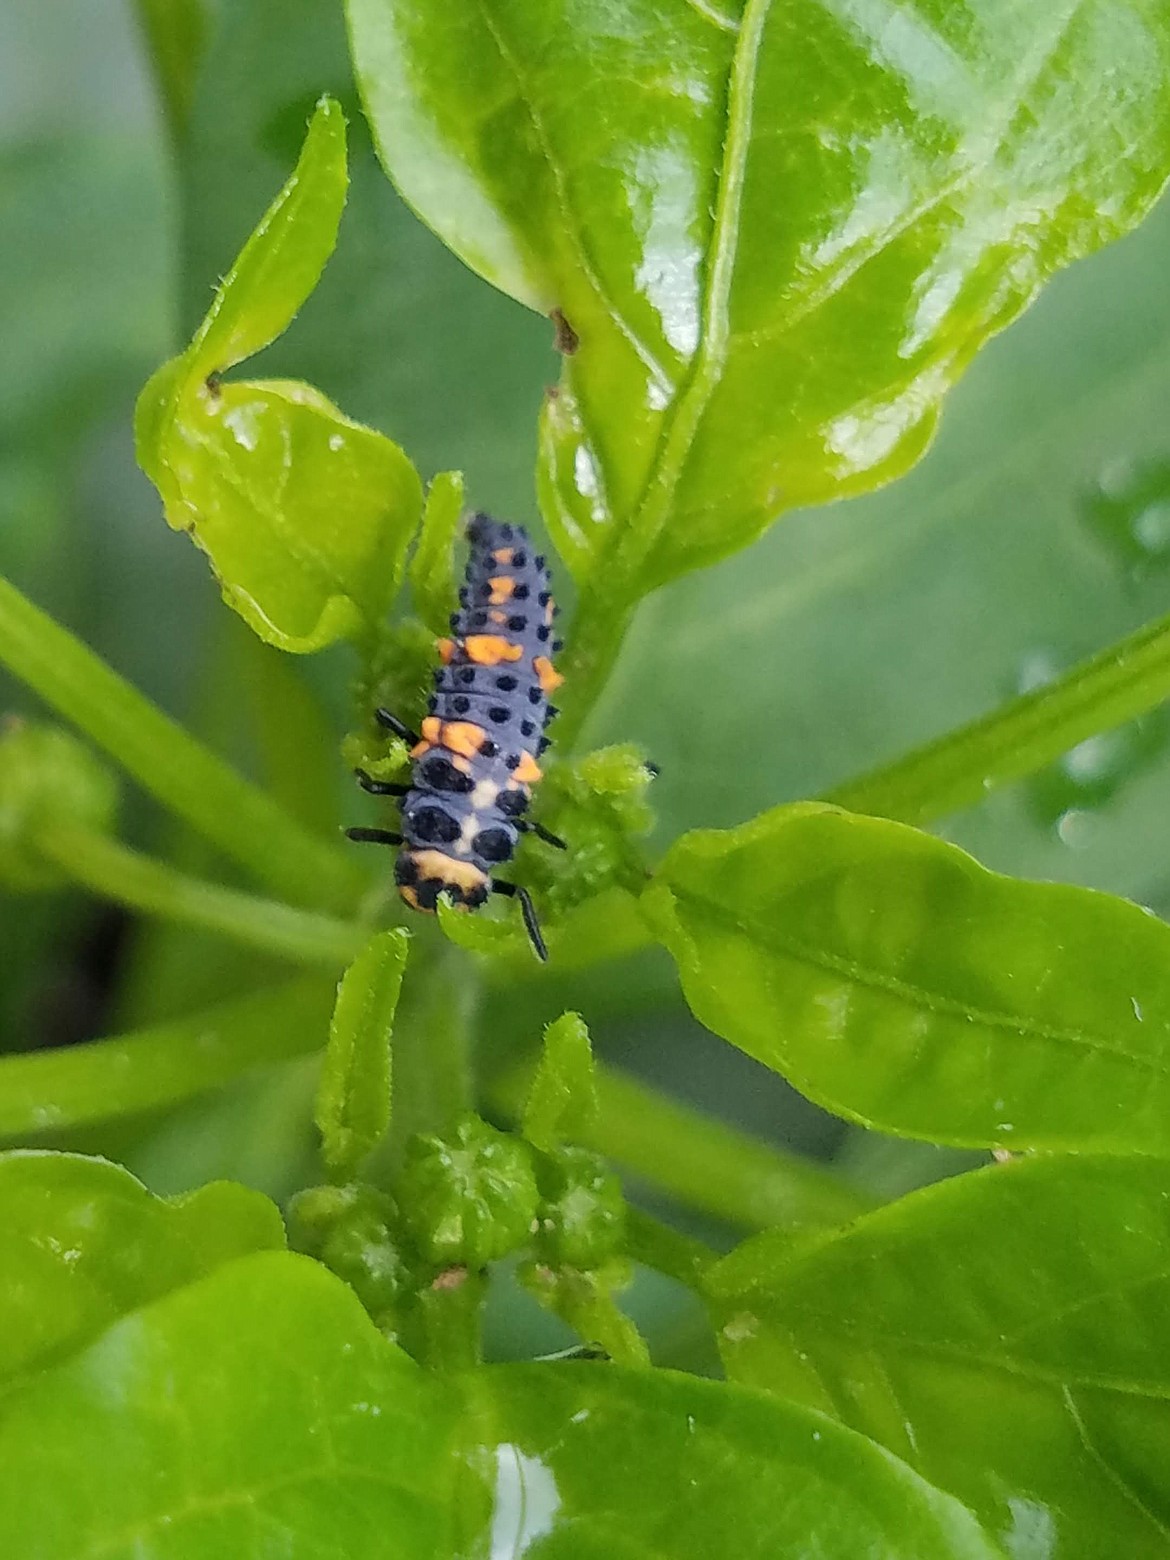 Before using any pesticide, identify the insect at hand. This scary looking insect is actually an immature ladybug. It will consume many more aphids than an adult ladybug.